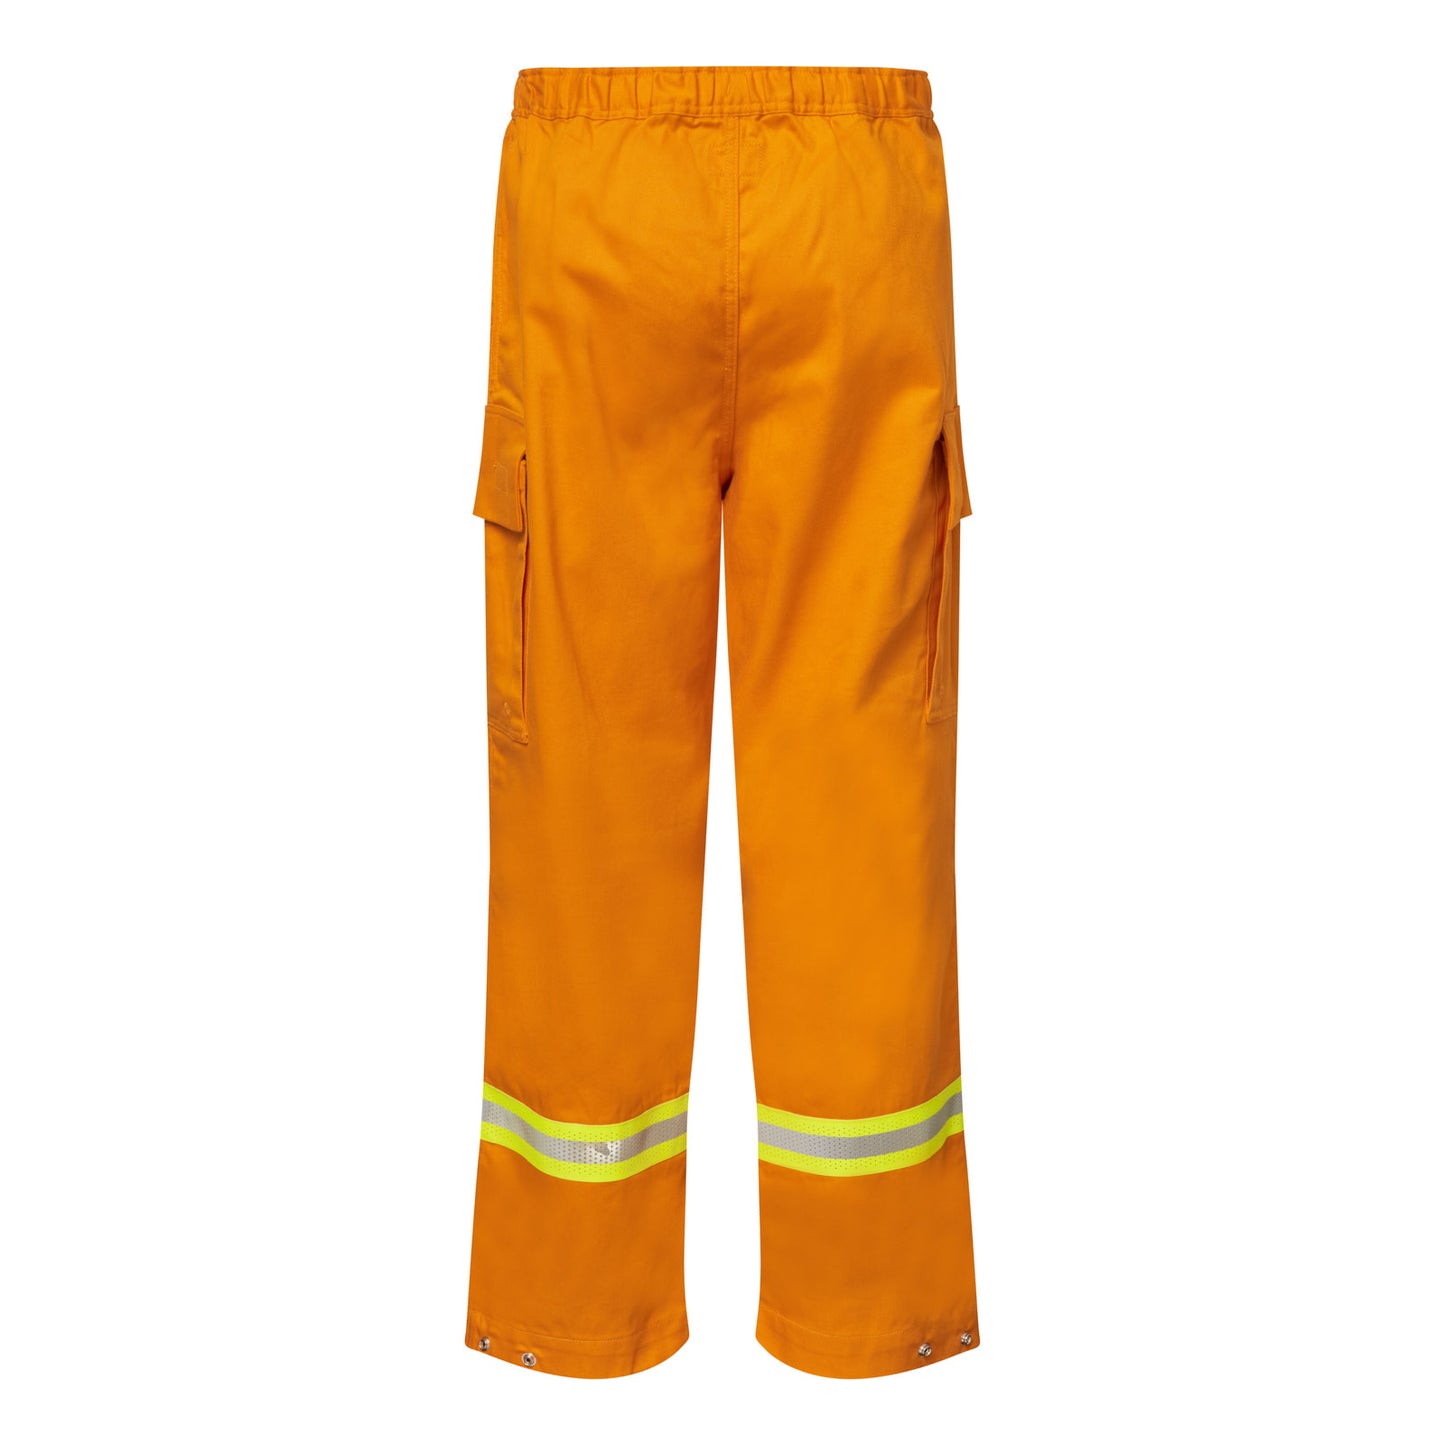 Wildlander Reflective Fire Fighting Trousers - made by FlameBuster